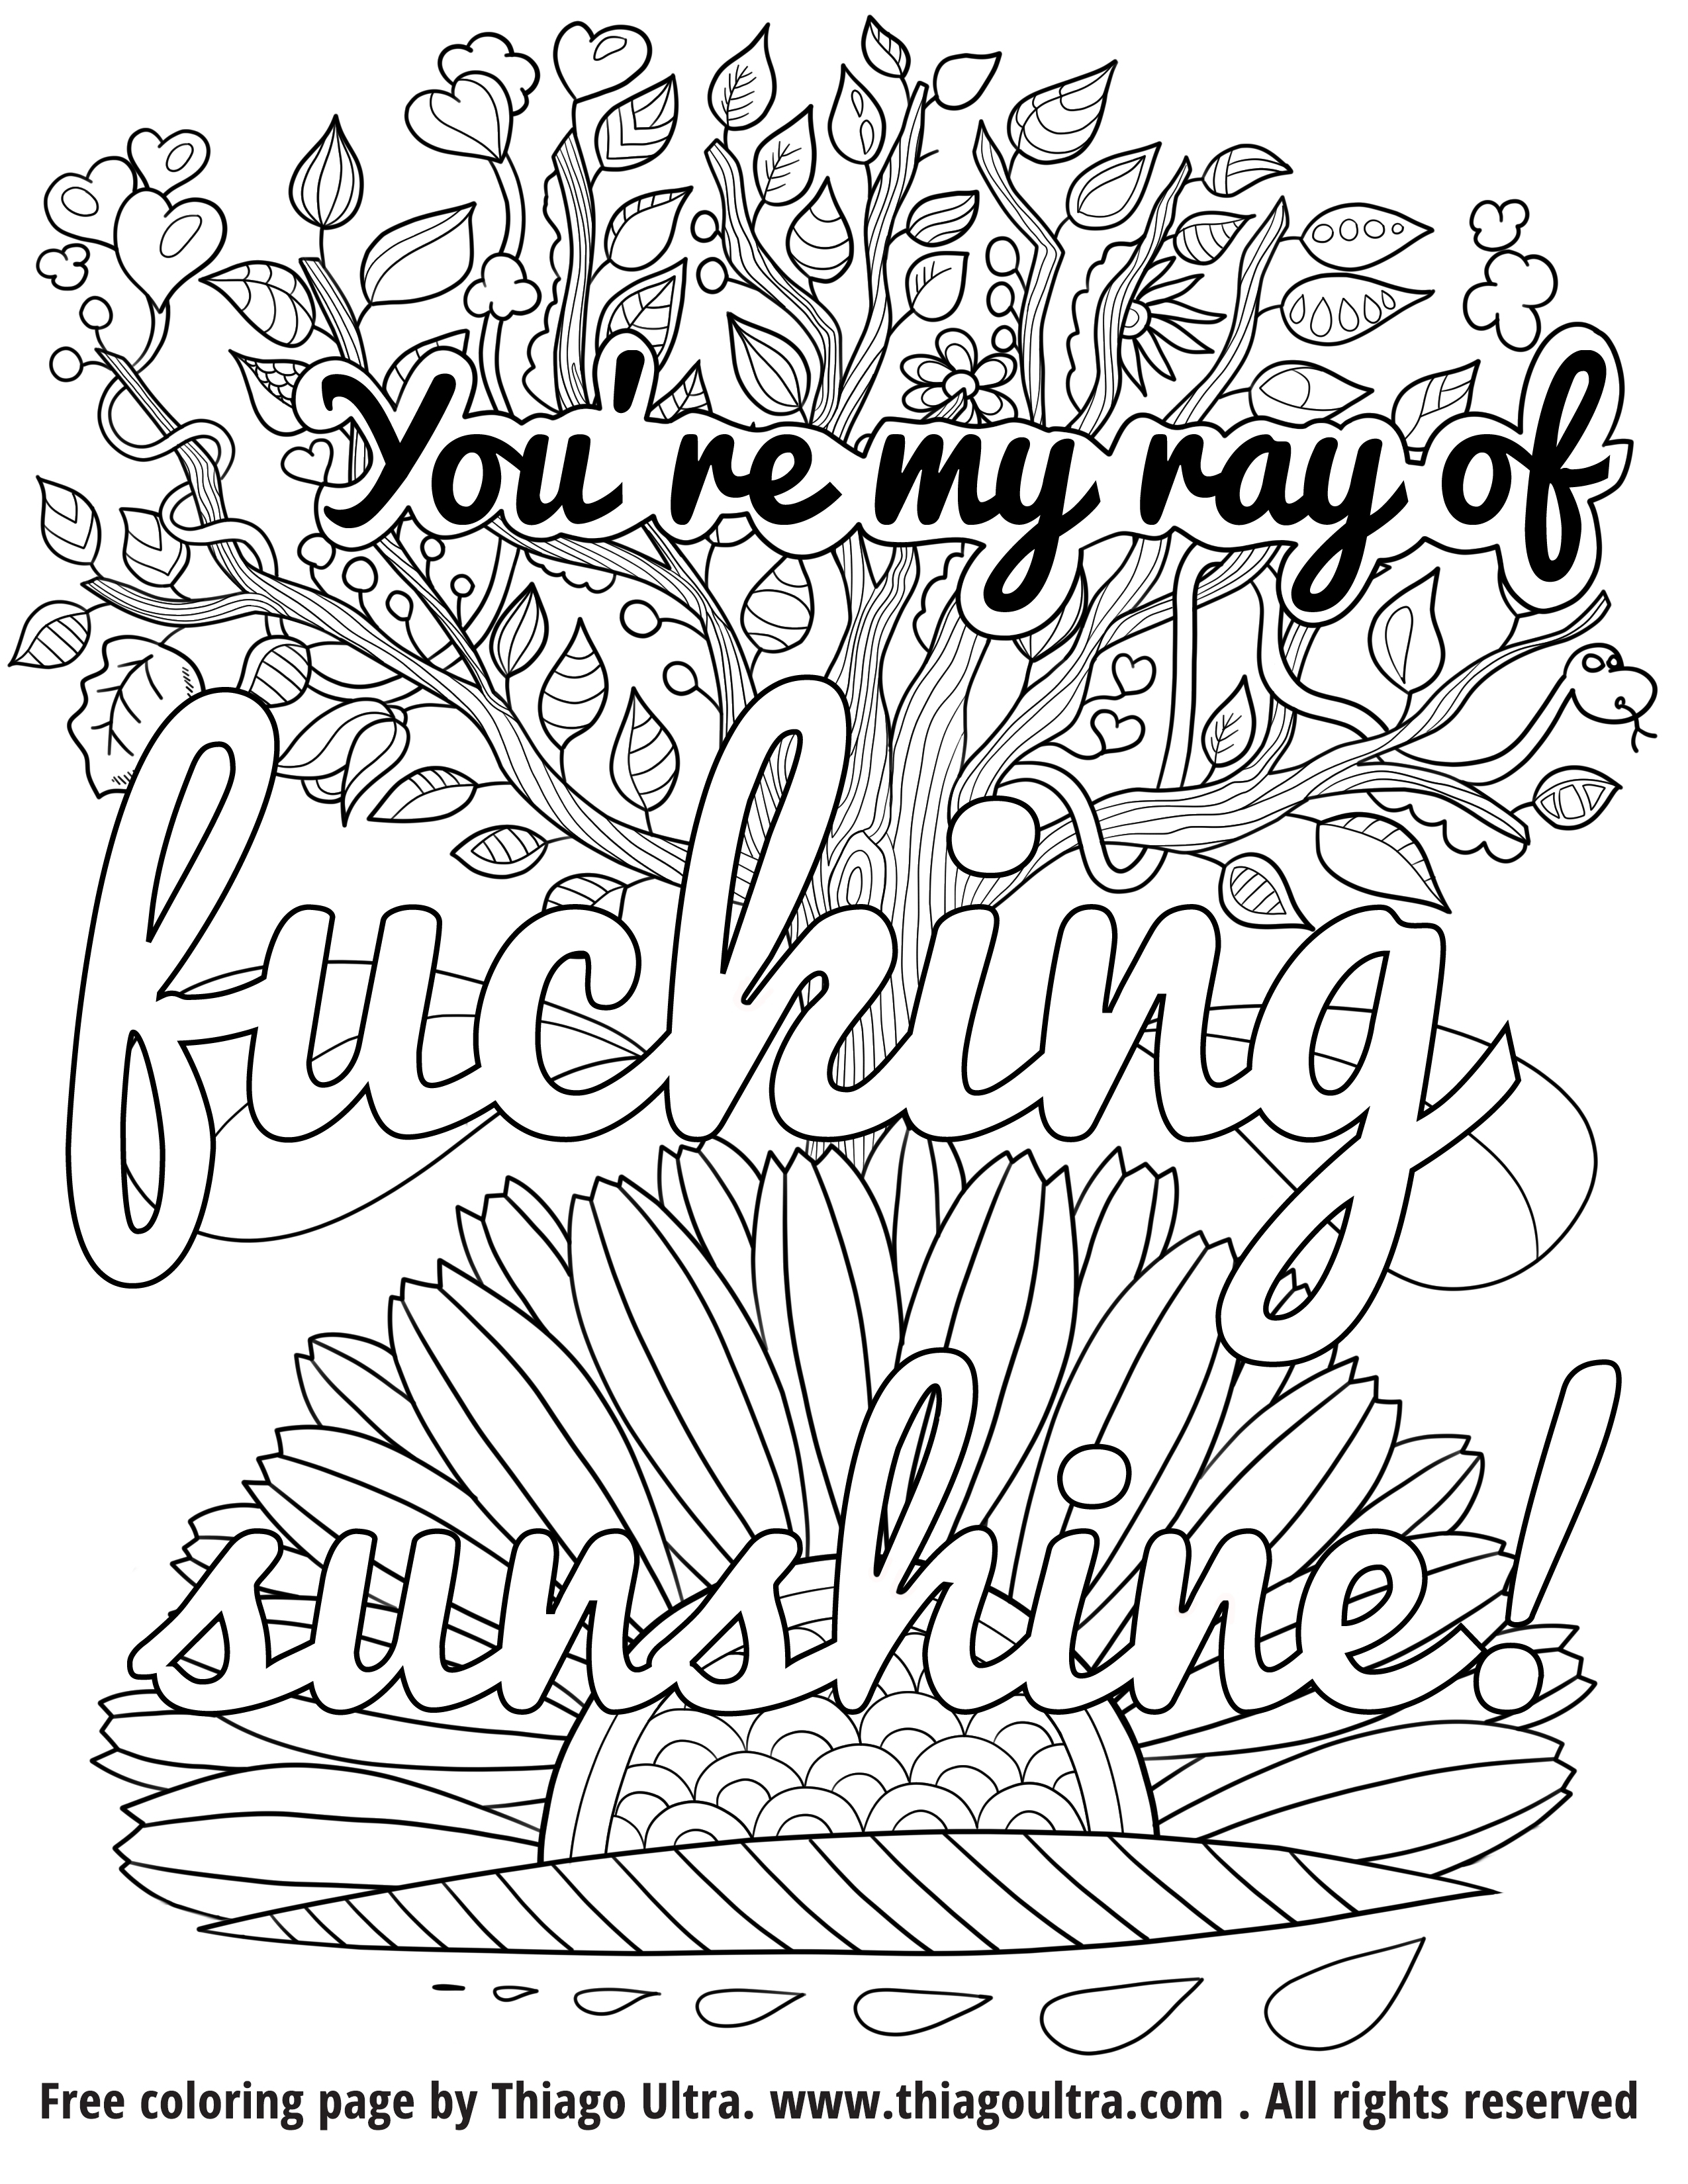 Coloring Pages : Coloring Pages Awesome Amazon Swear Word Book The - Free Printable Coloring Pages For Adults Swear Words